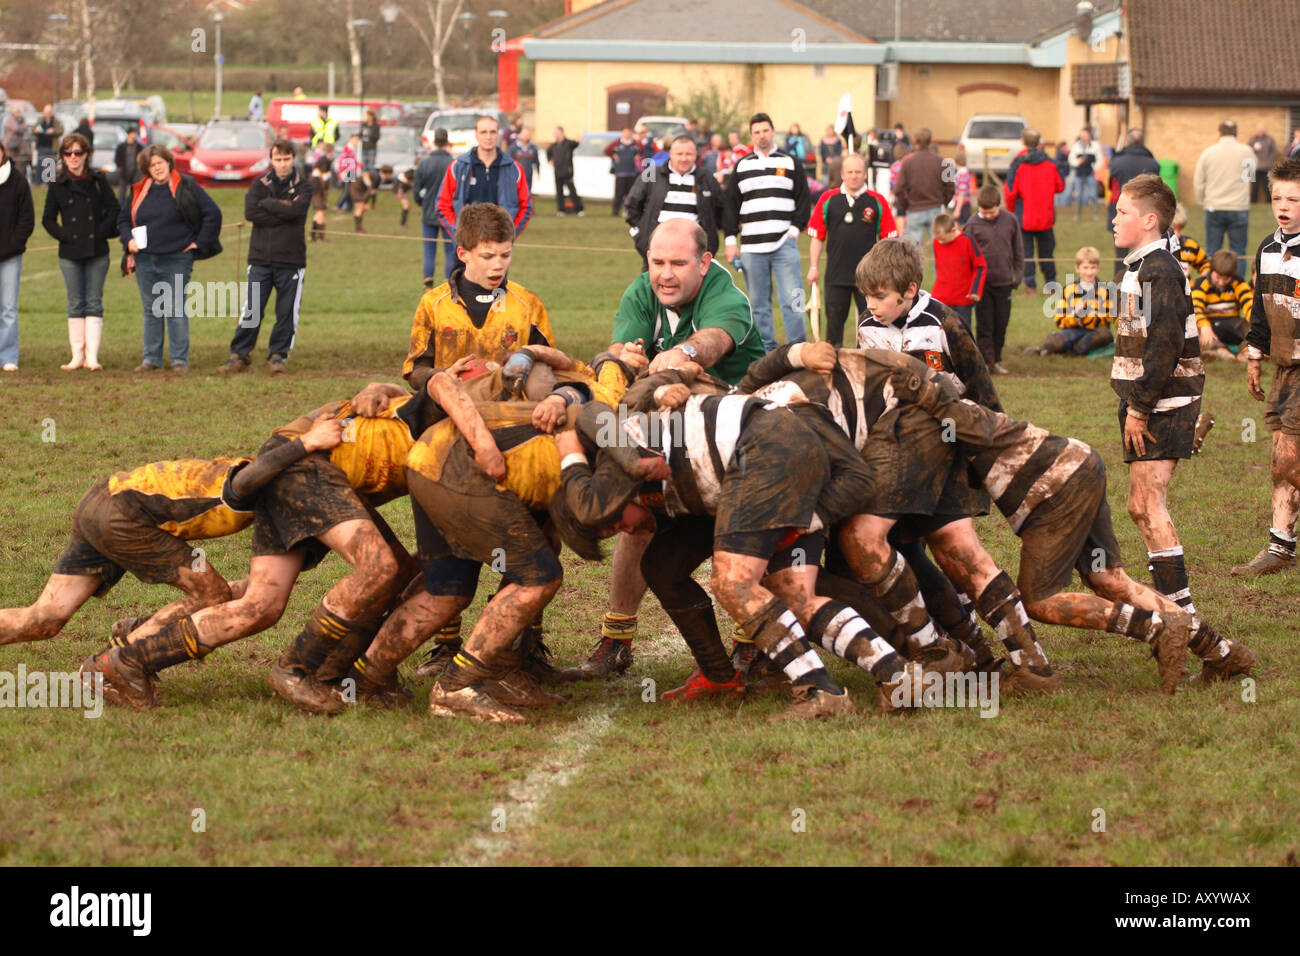 Junior rugby match Under 12 players scrum scrumage under the guidance of the match referee EDITORIAL USE ONLY Stock Photo